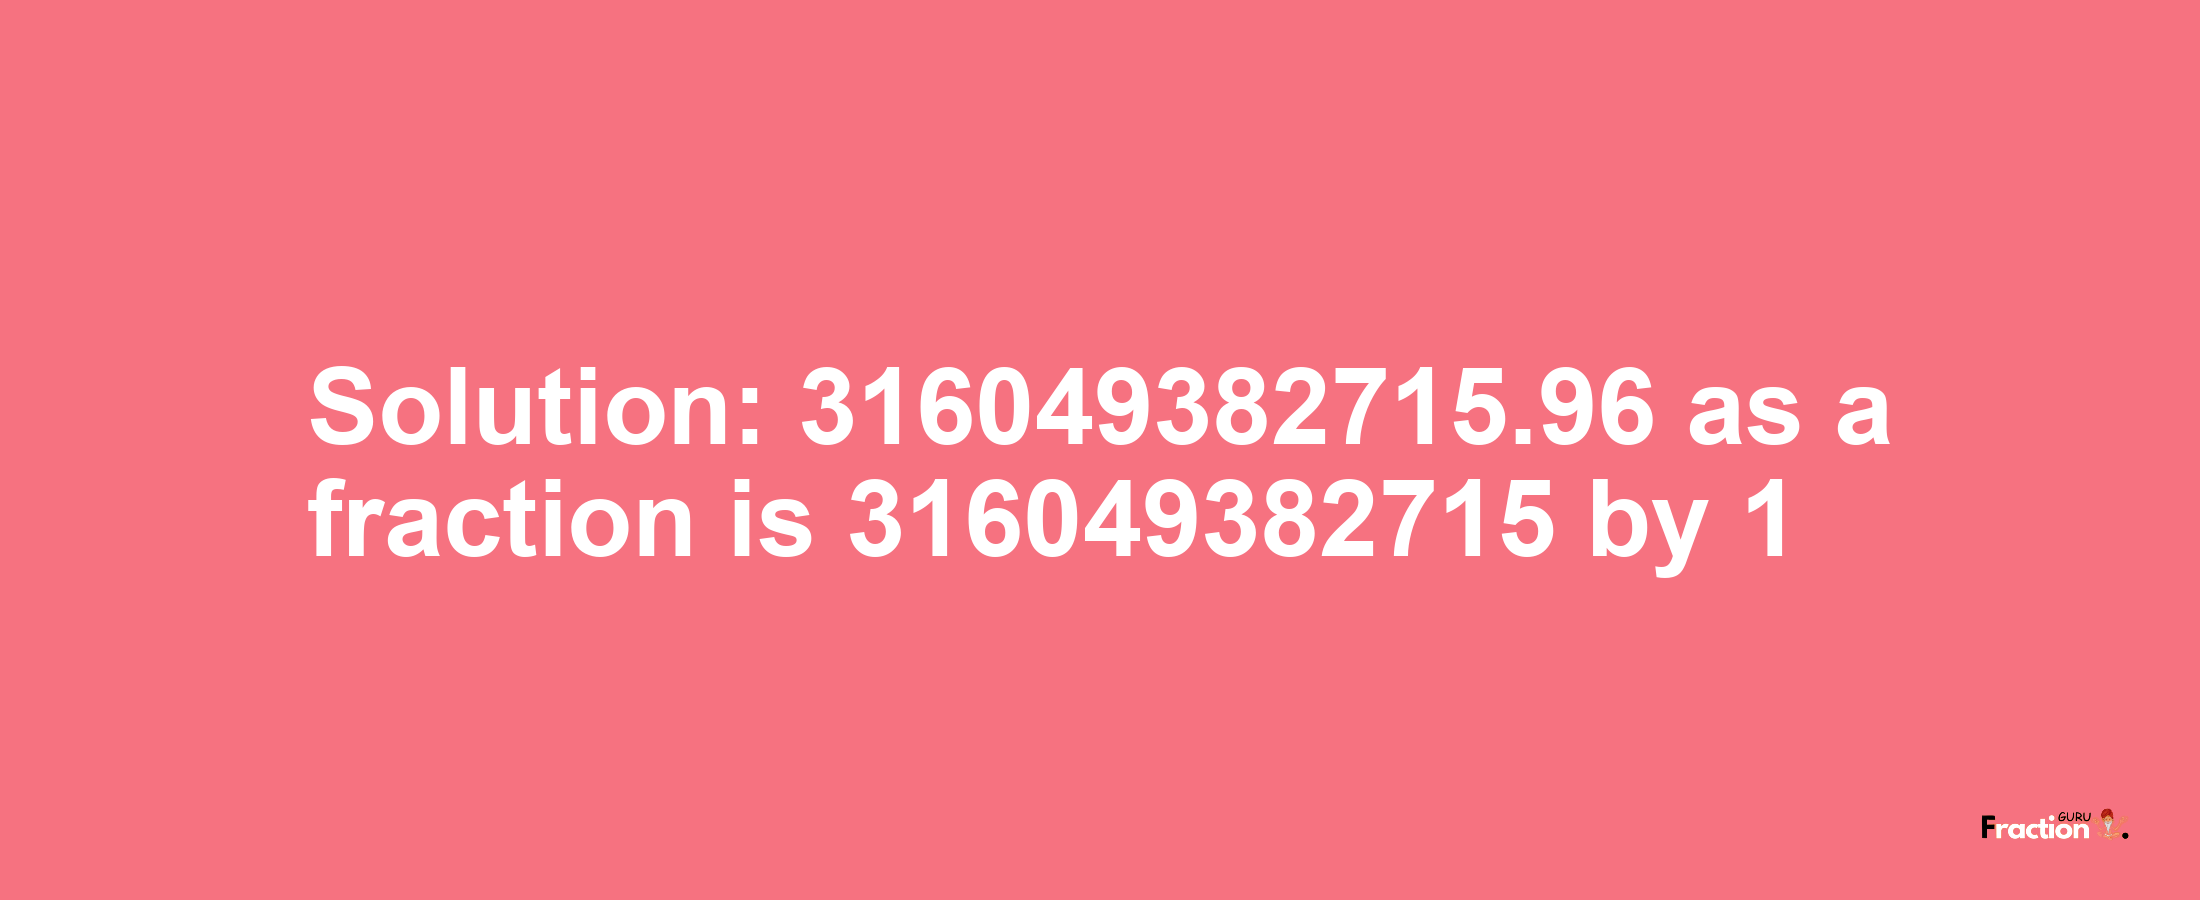 Solution:316049382715.96 as a fraction is 316049382715/1